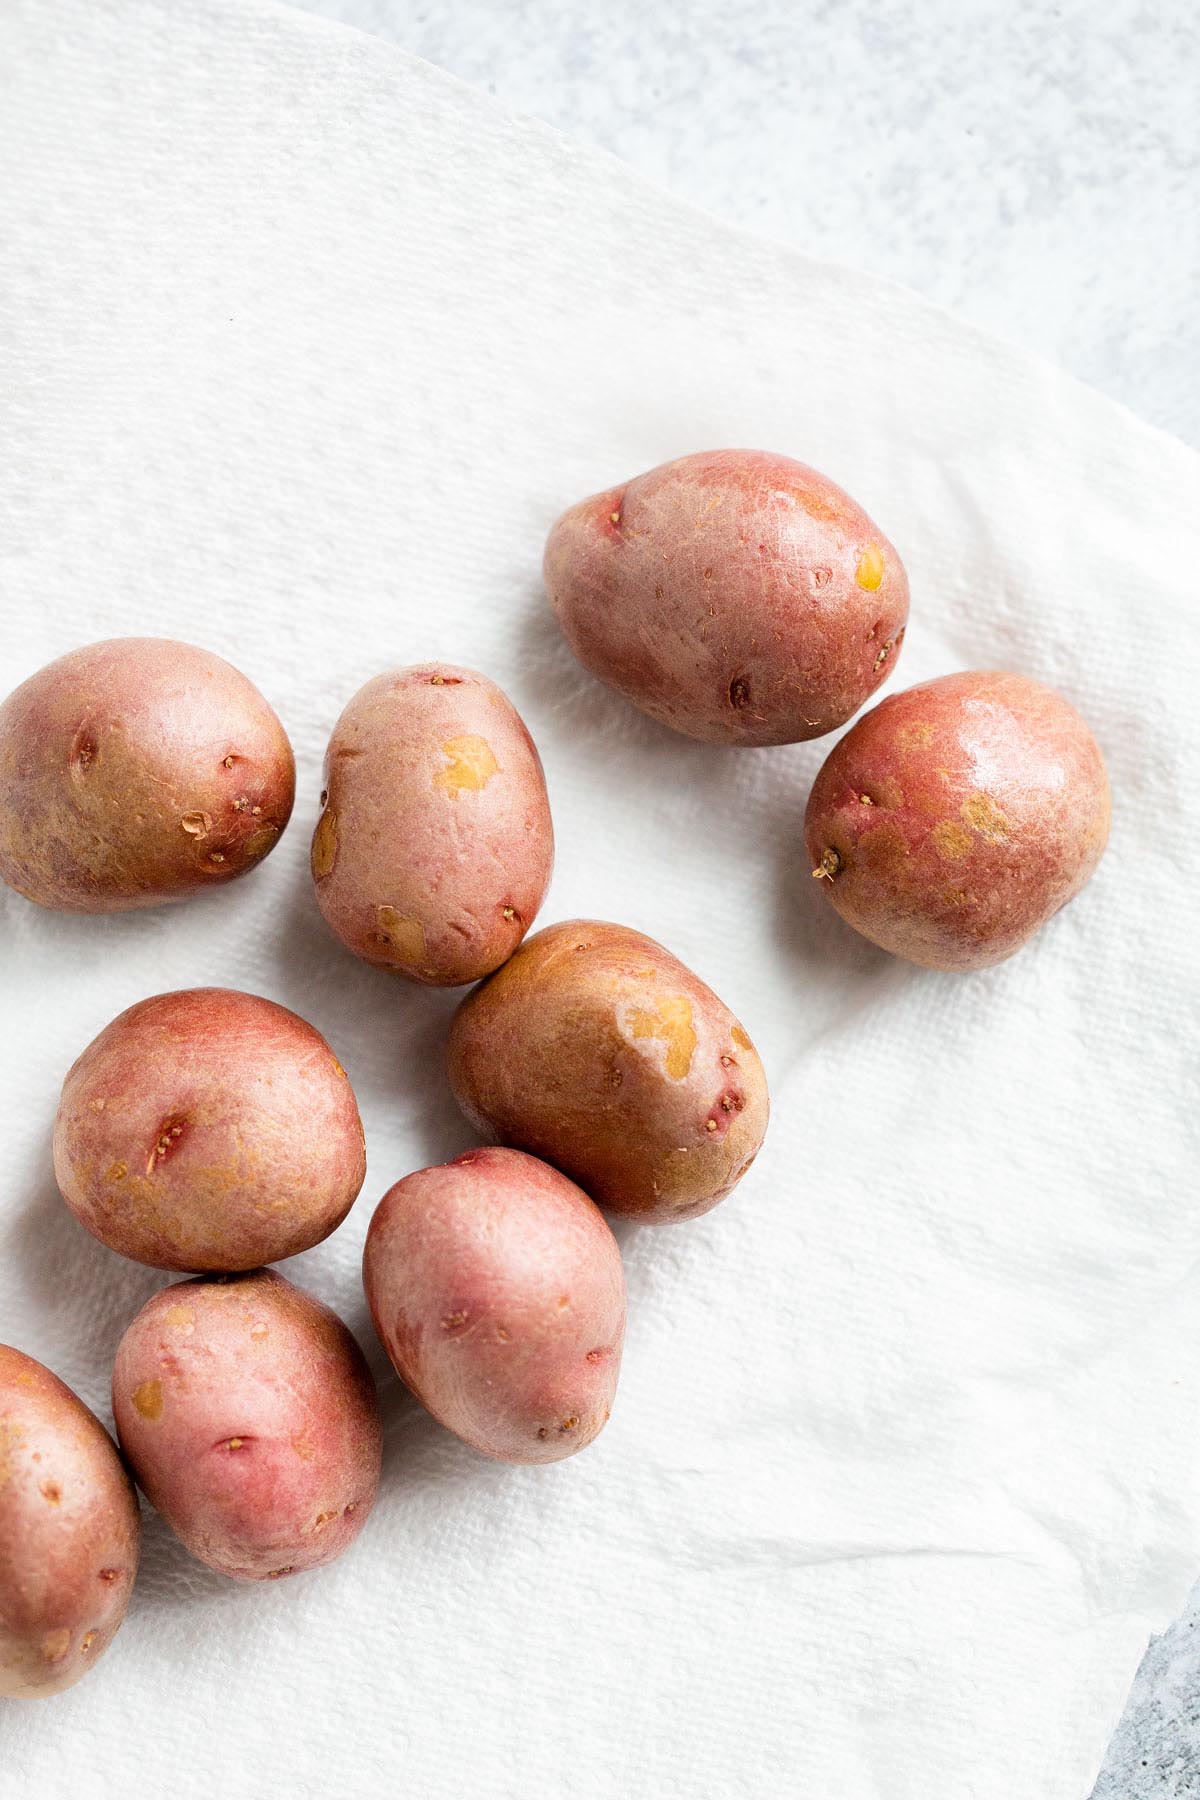 Red baby potatoes.